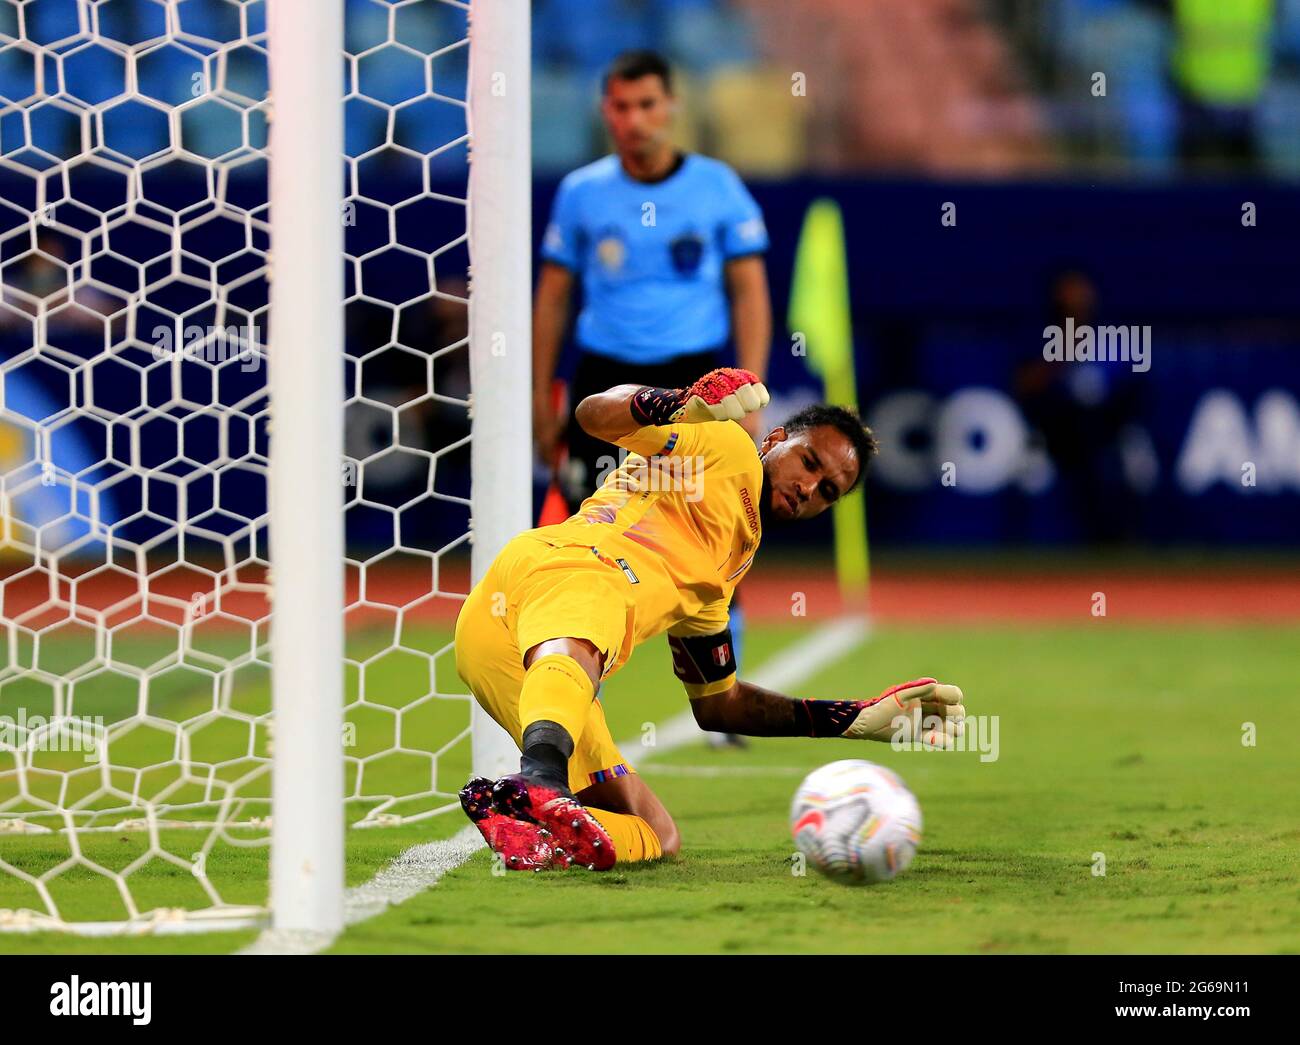 GOIANIA, BRAZIL - JULY 02: Pedro Gallese of Peru on Shootout ,during the Quarterfinal match between Peru and Paraguay as part of Conmebol Copa America Brazil 2021 at Estadio Olimpico on July 2, 2021 in Goiania, Brazil. (MB Media) Stock Photo